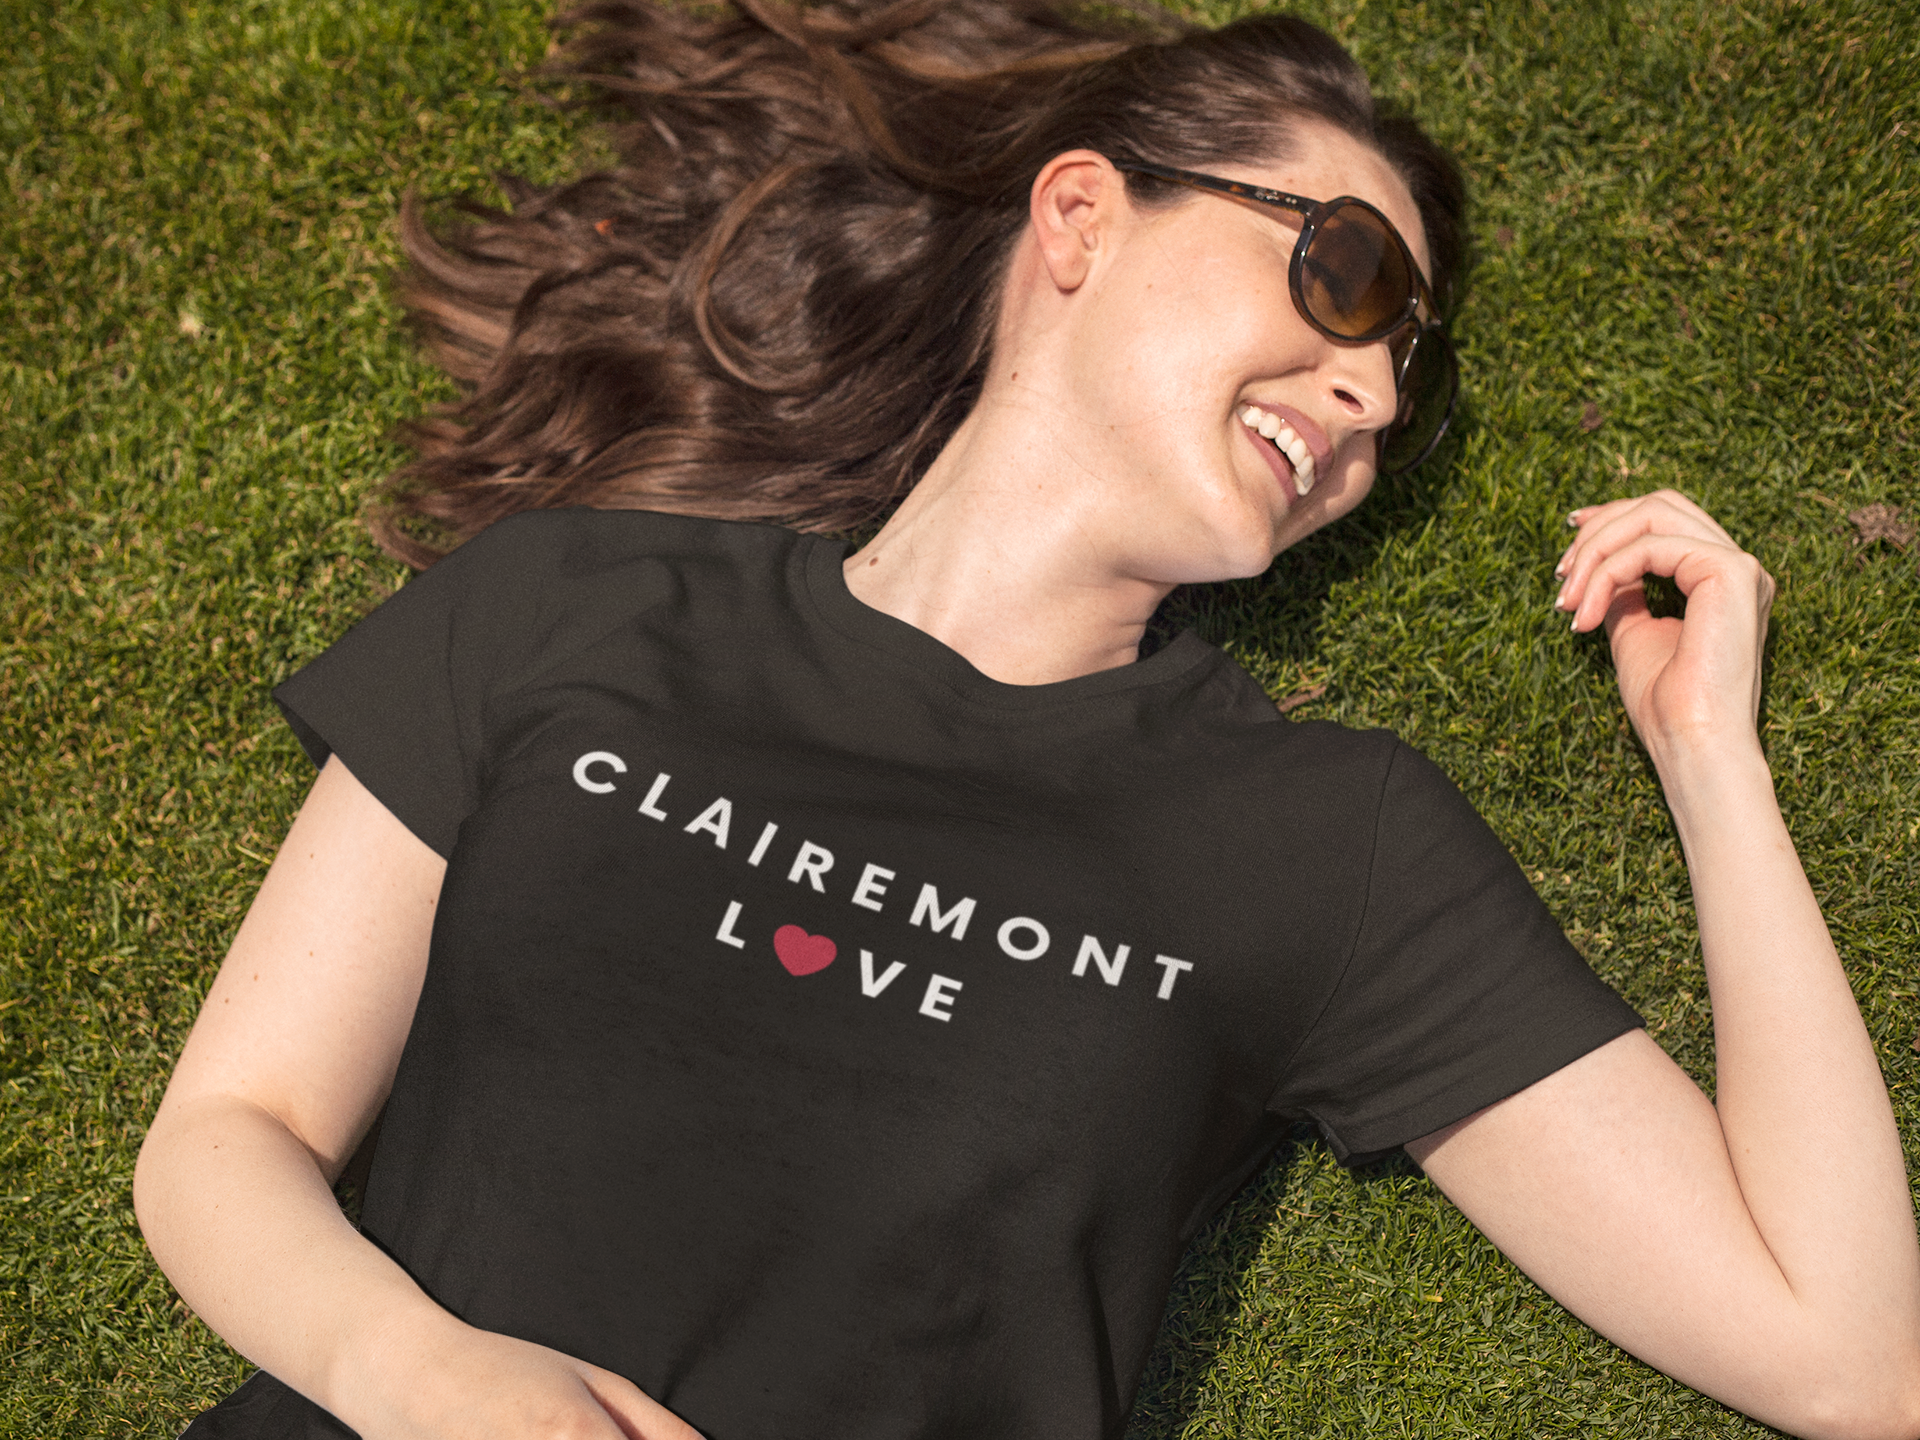 Woman with sunglasses laying in the grass wearing a Clairemont t-shirt.